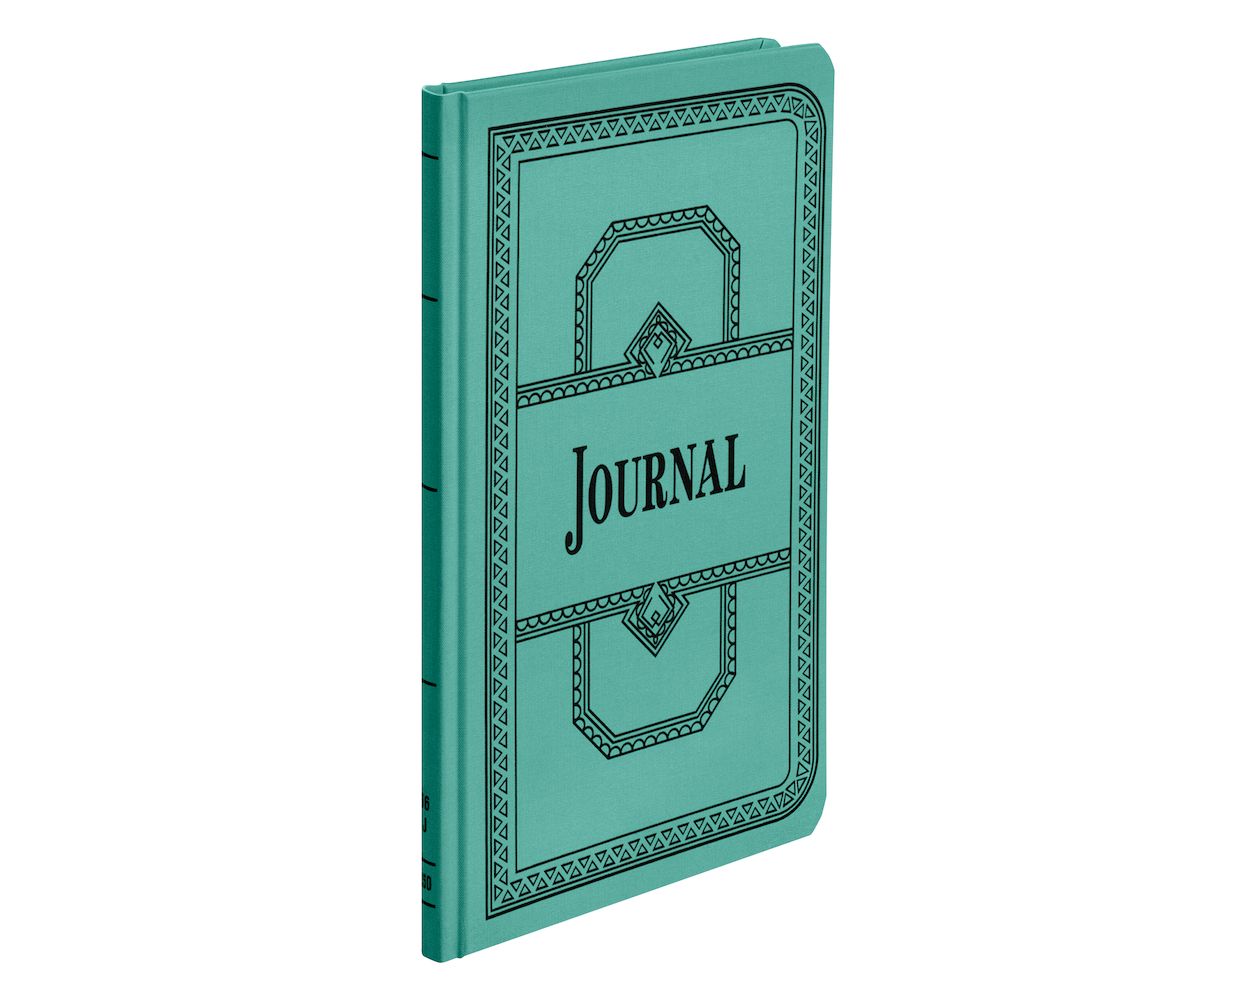 12 1/8 x 7 5/8 500 Pgs Blue Journal Rule Boorum & Pease Record/Account Book 